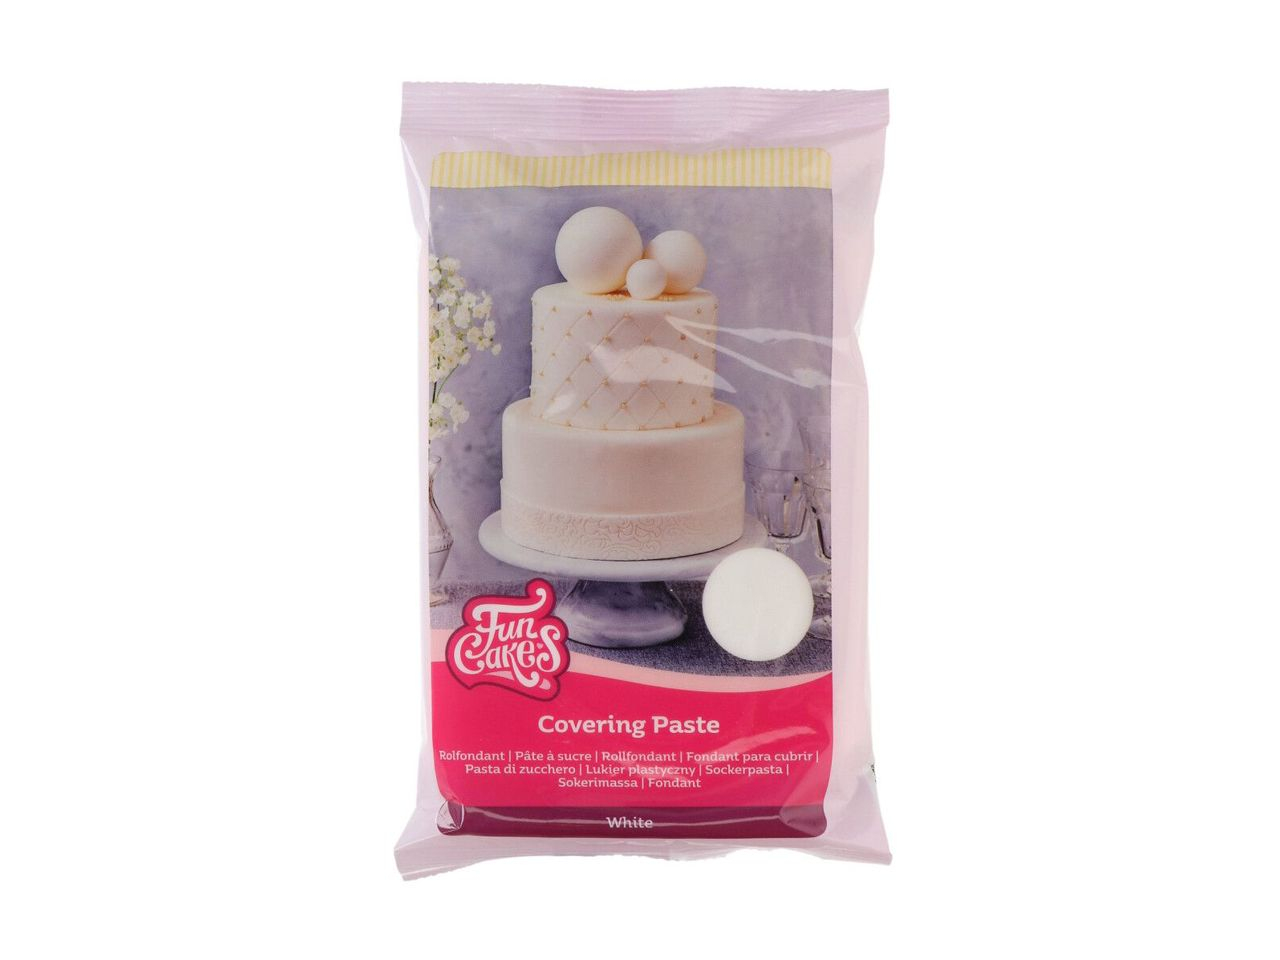 FunCakes Covering Paste wei 500g